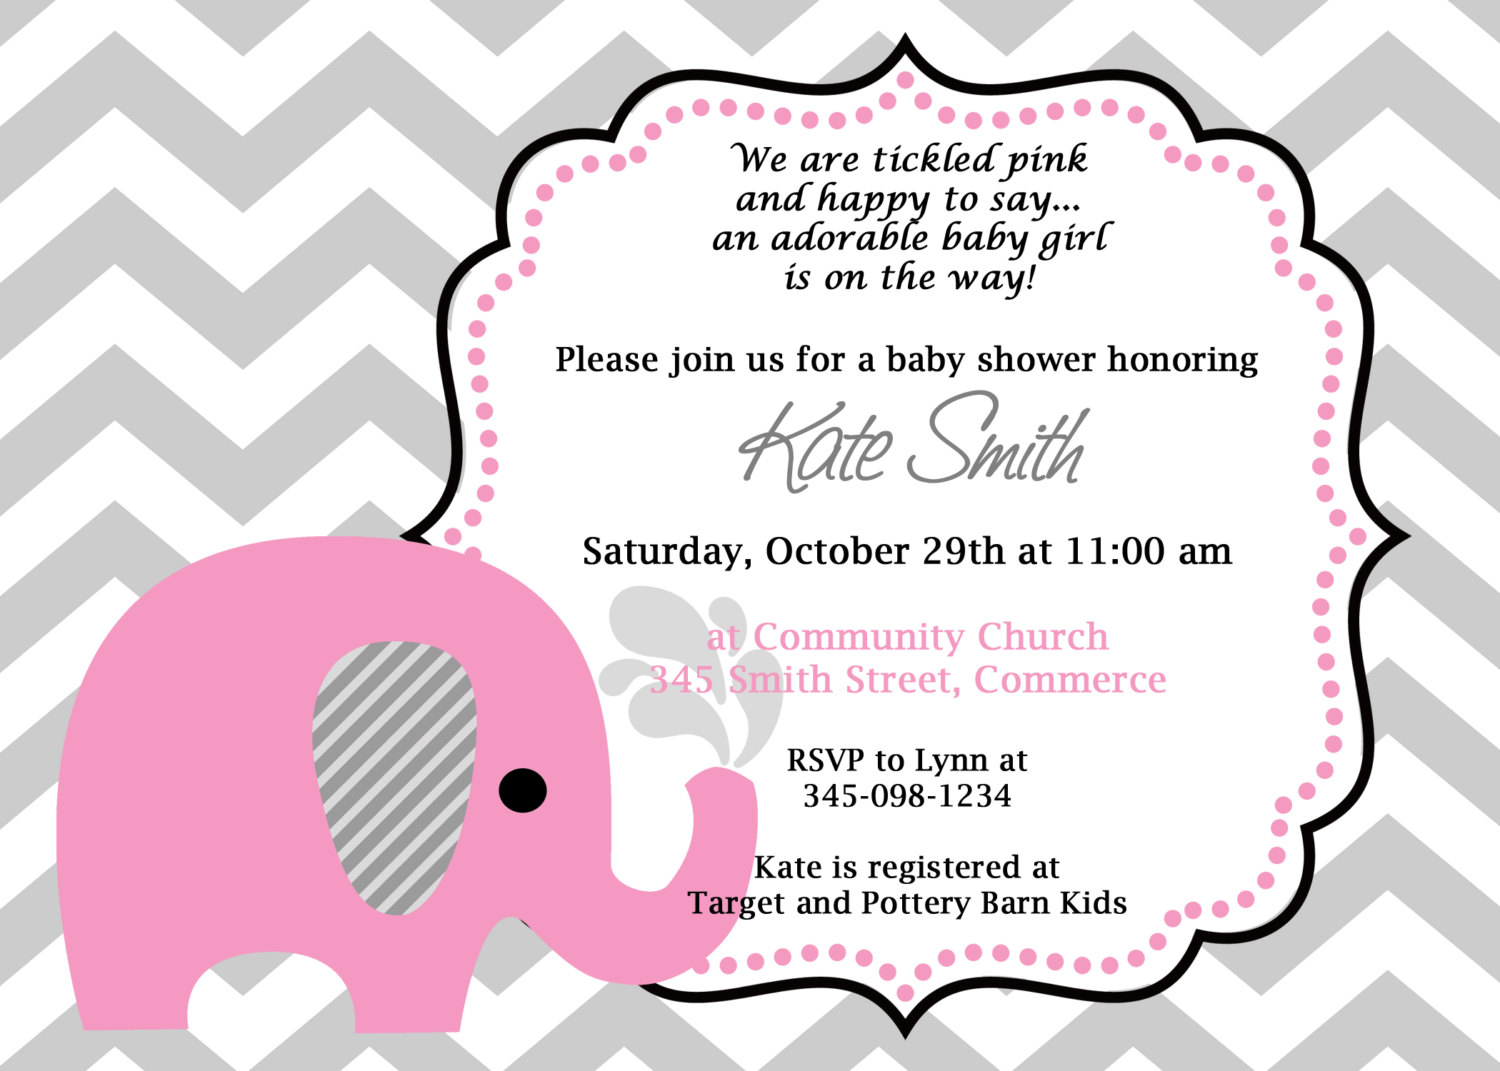 Full Size of Baby Shower:delightful Baby Shower Invitation Wording Picture Designs Arreglos Baby Shower Niño Baby Shower Hampers Baby Shower Snapchat Filter Ideas Para Baby Showers Baby Shower Wishing Well Baby Shower Notes